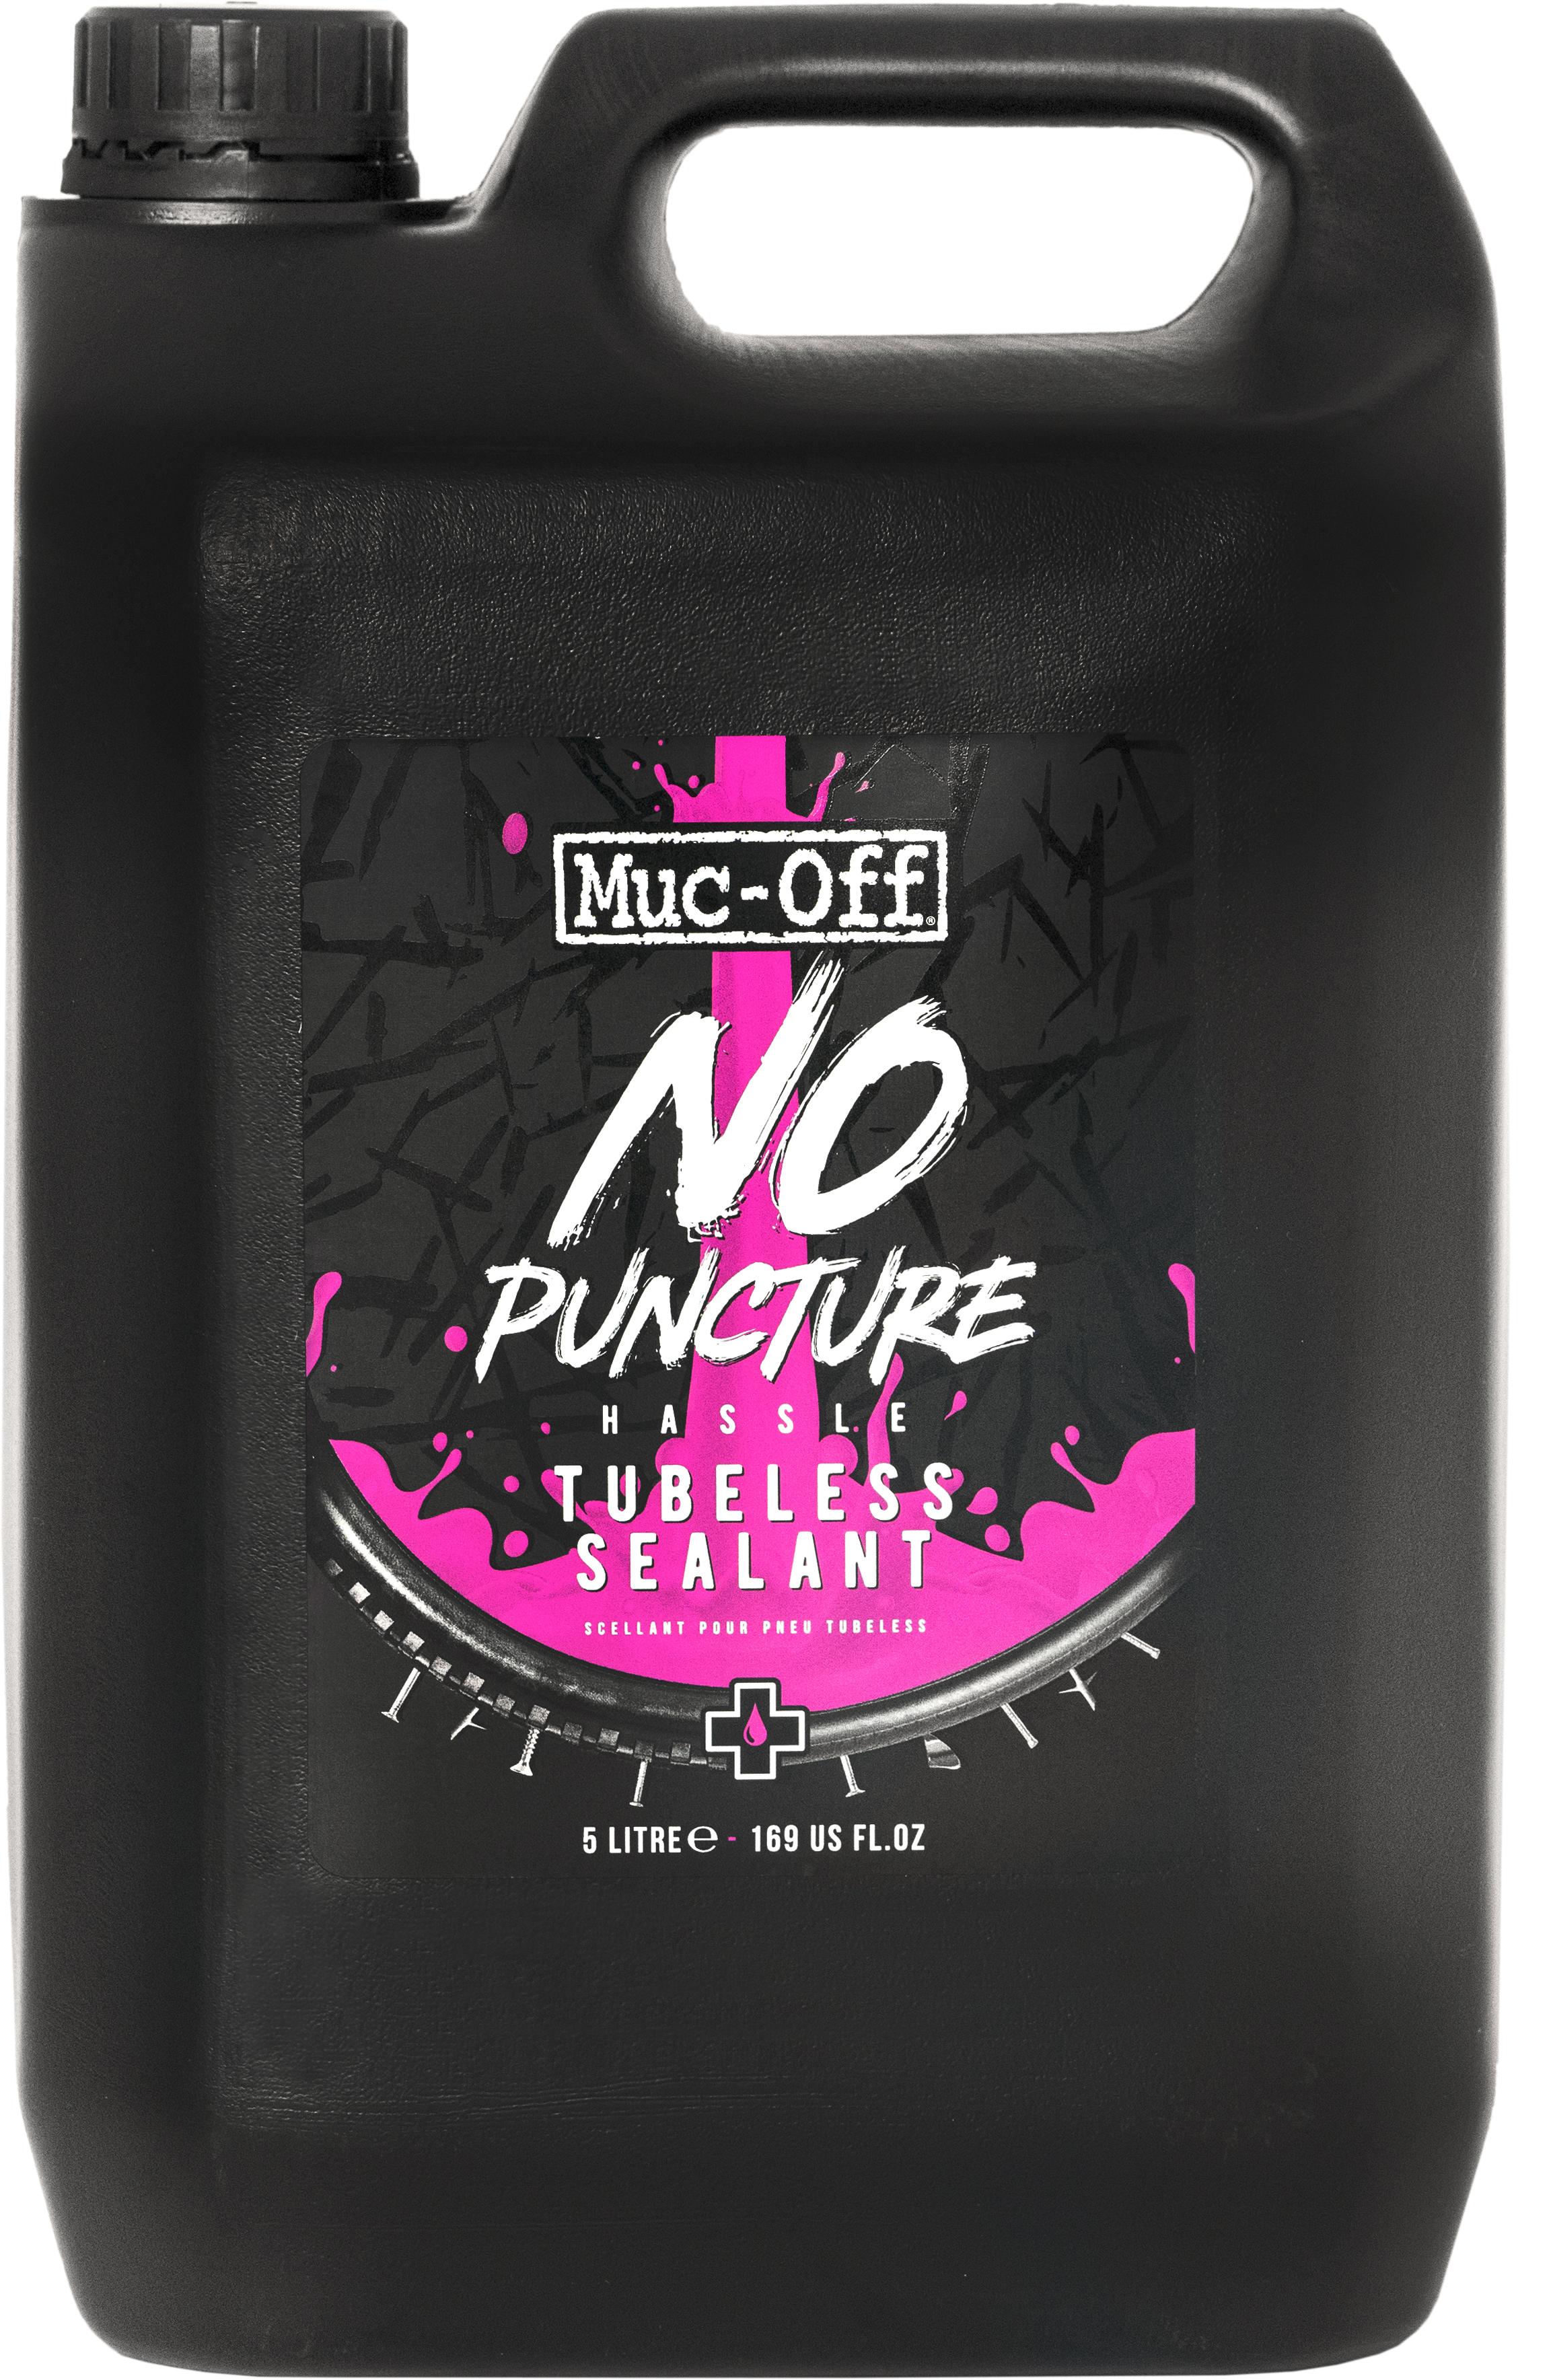 Muc-off No Puncture Hassle Tubeless Sealant (5l)  Black